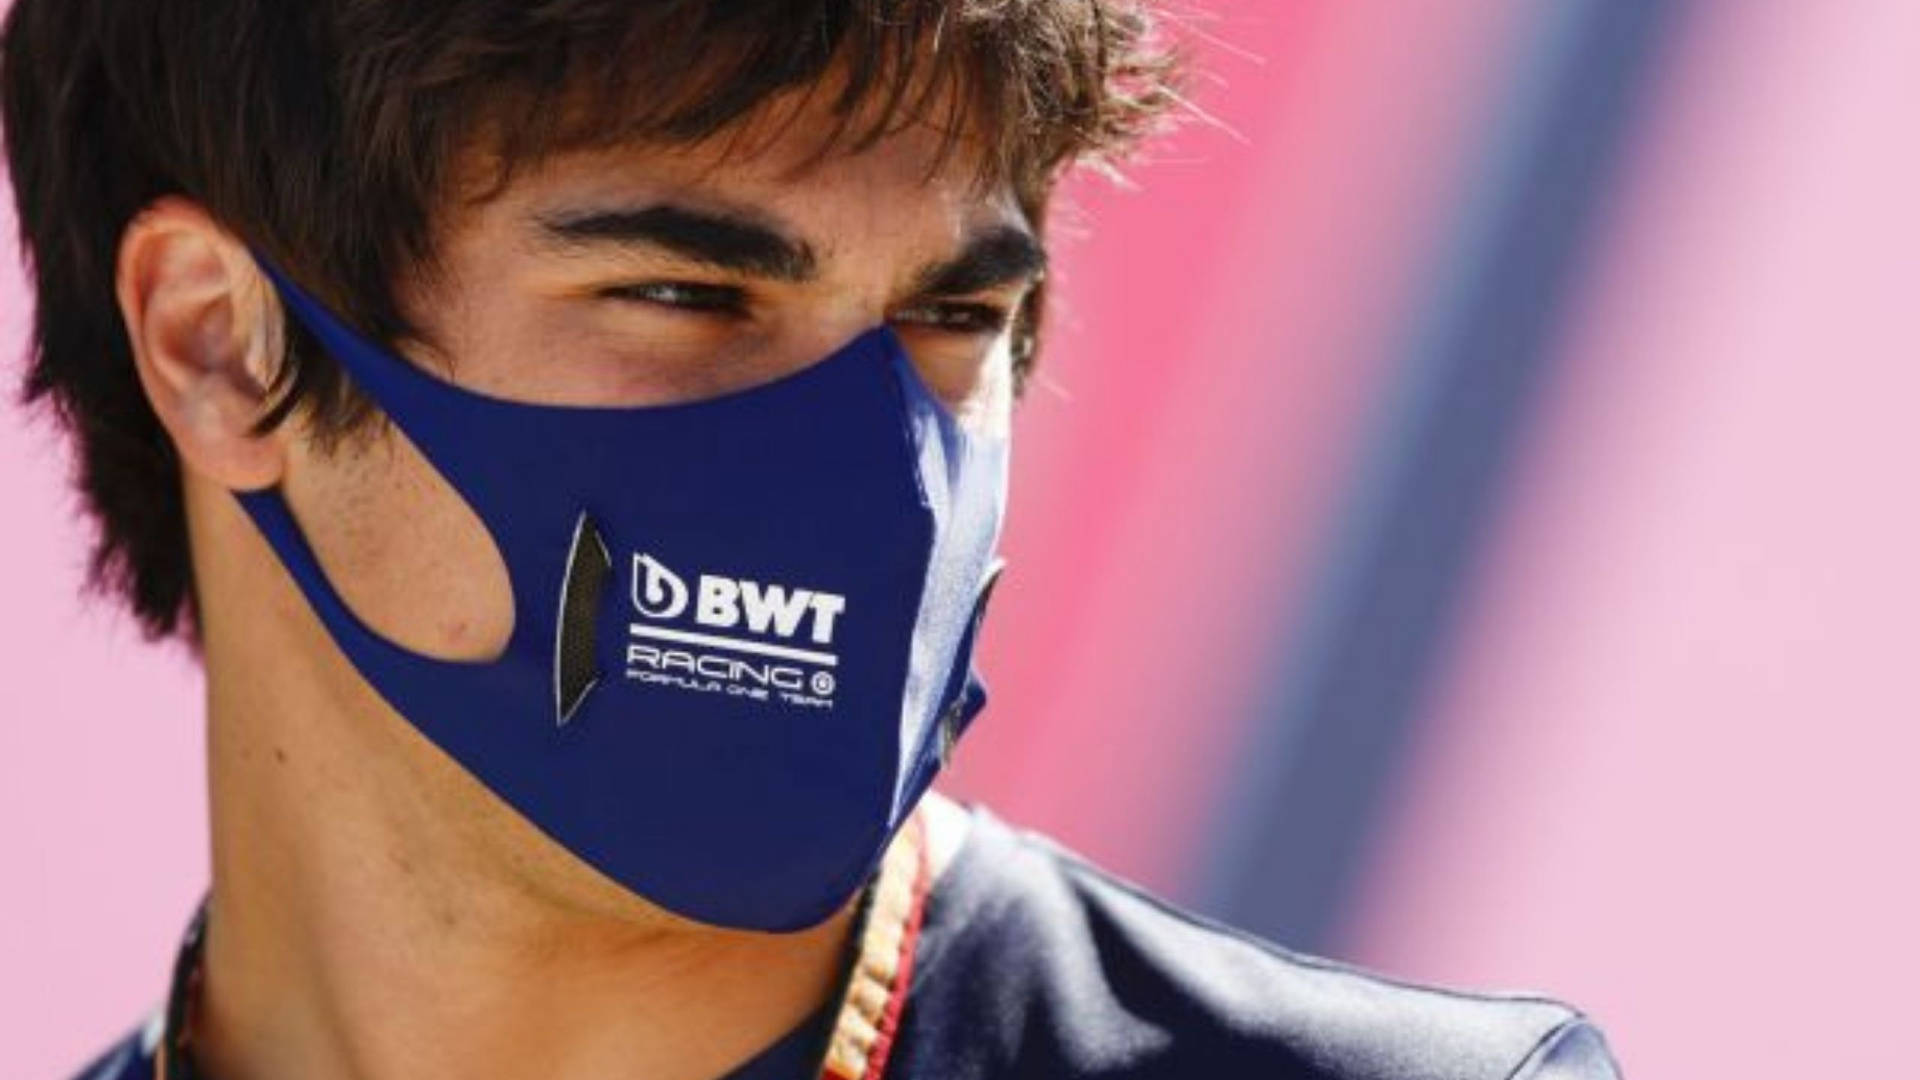 Lancestroll Bwt Racing Mask In German Could Be Translated As 